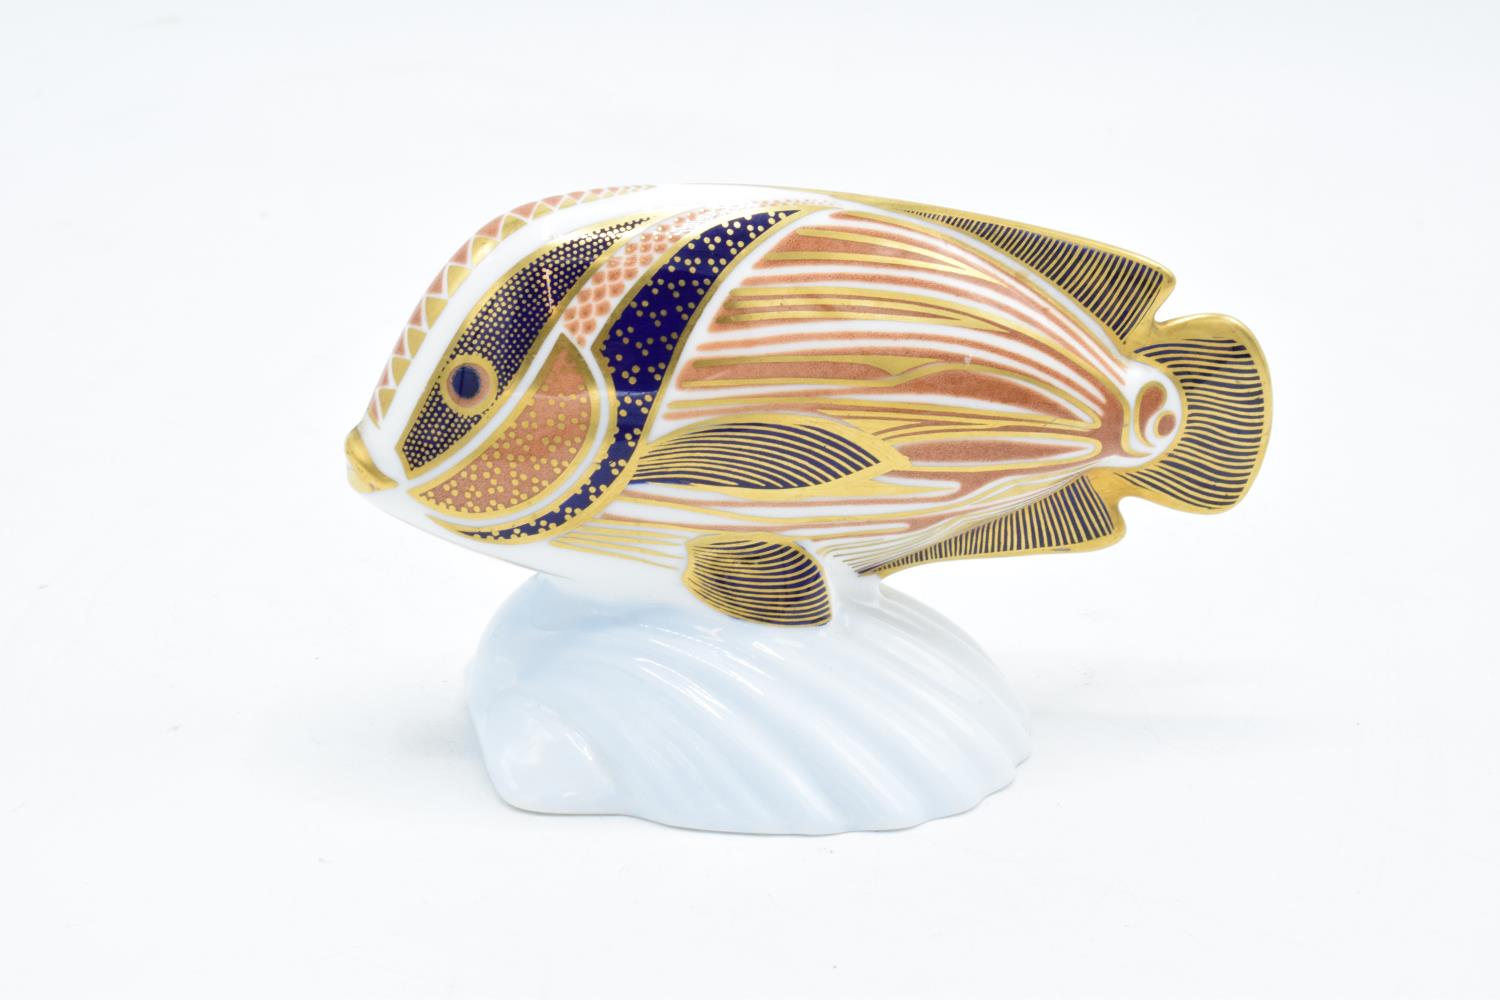 Royal Crown Derby tropical fish paperweight in the form of a Sweetlips. In good condition with no